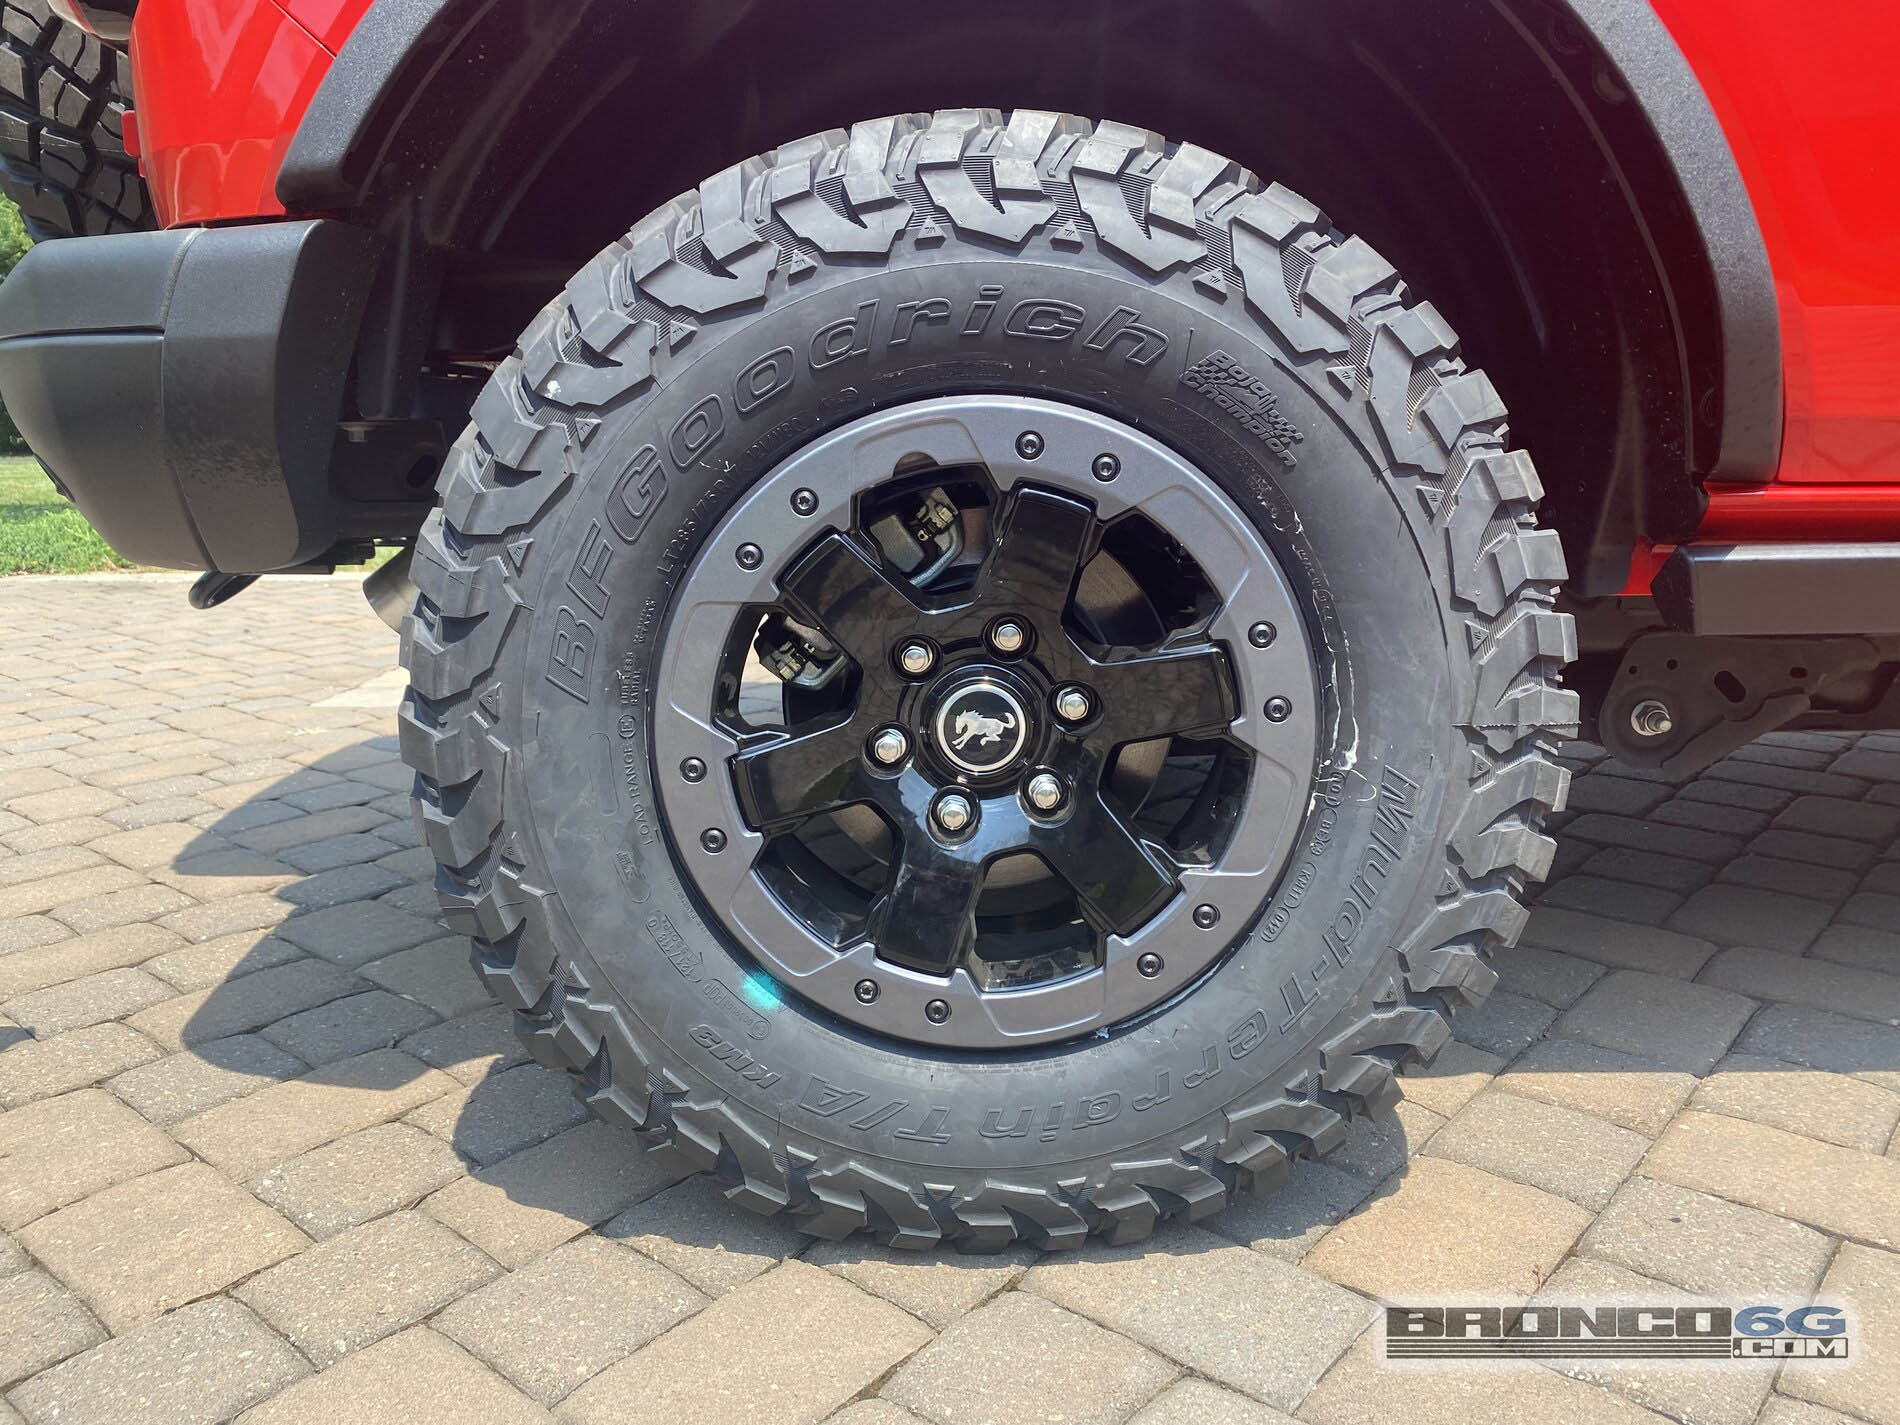 Ford Bronco BFG KM3 M/T Tires (285/75/17) Fitted on 2021 Bronco Badlands 2021 Bronco Badlands on 285:75:17 BFG M:T tires 3